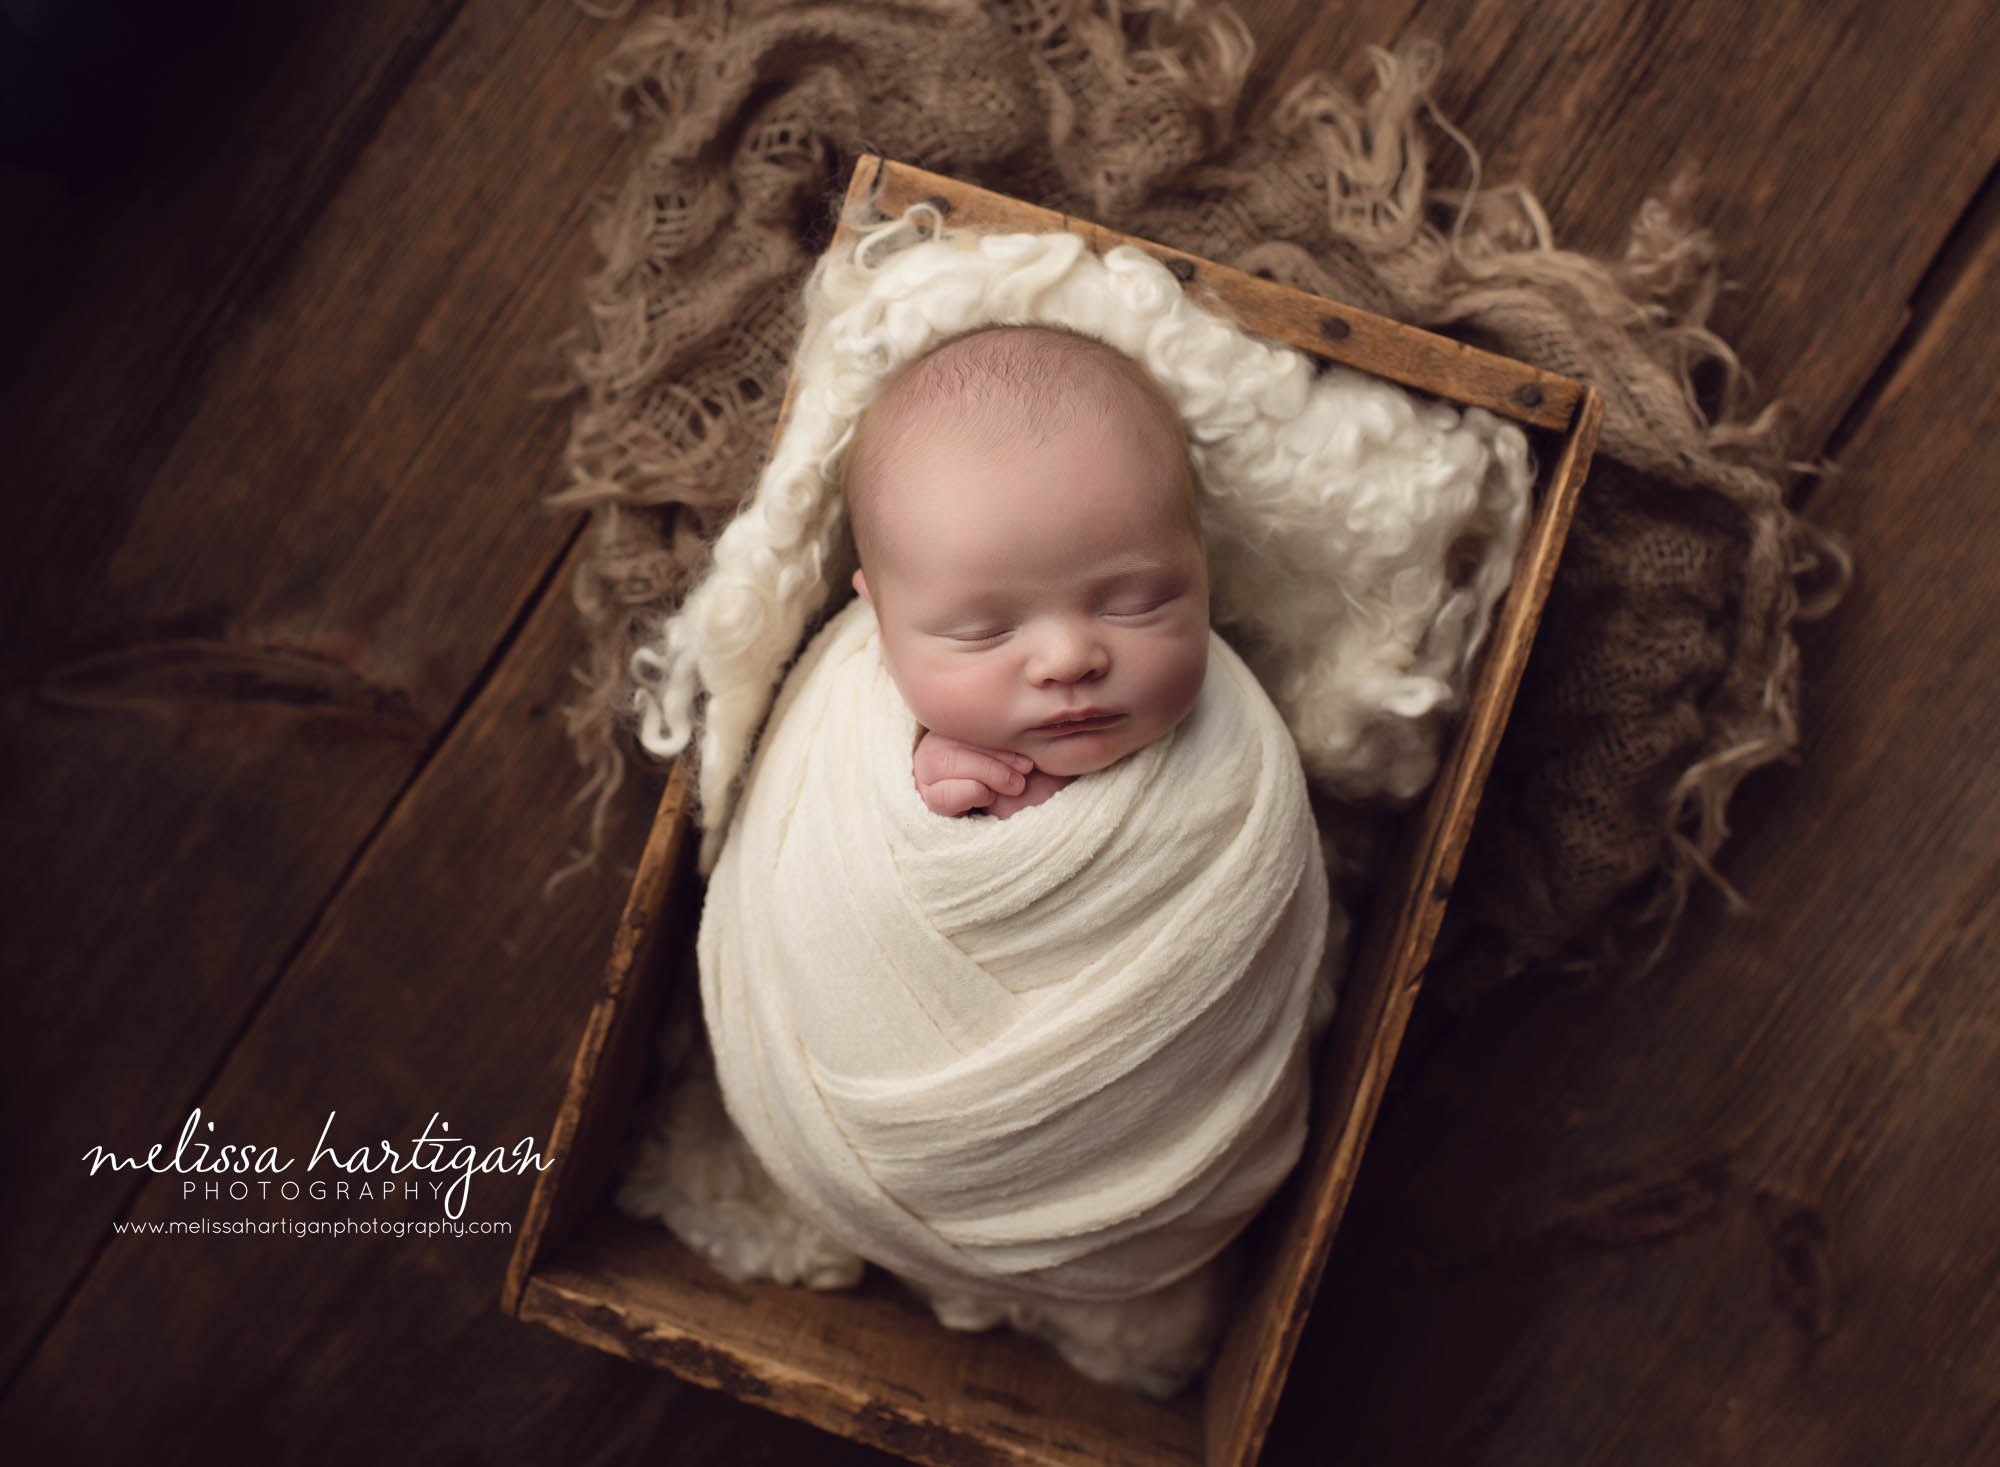 baby wrapped in cream layered wrap in a create with burlap on wood boards